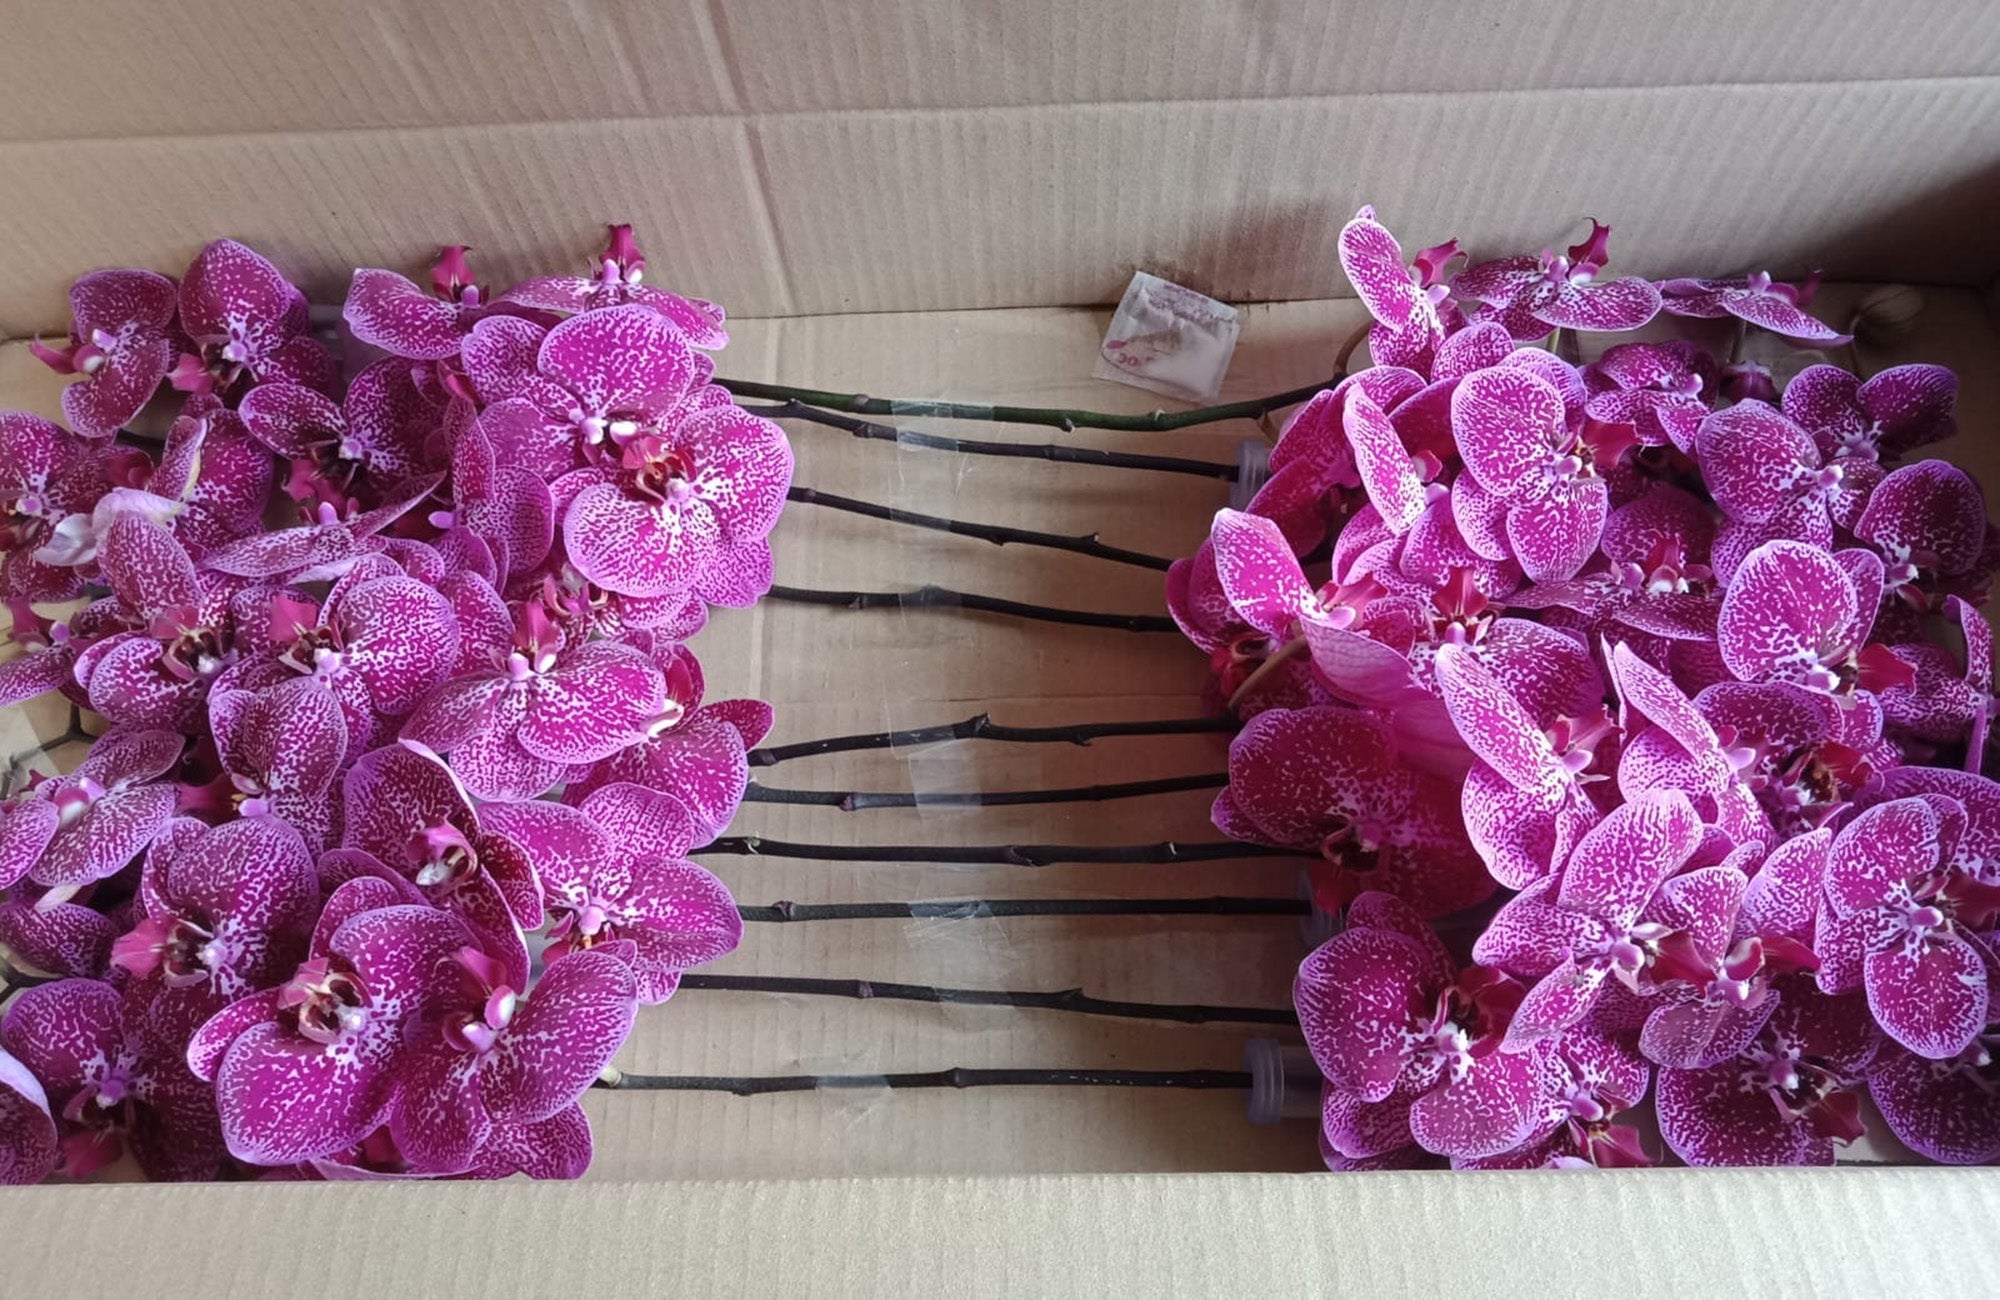 Box containing orchid flowers in pink